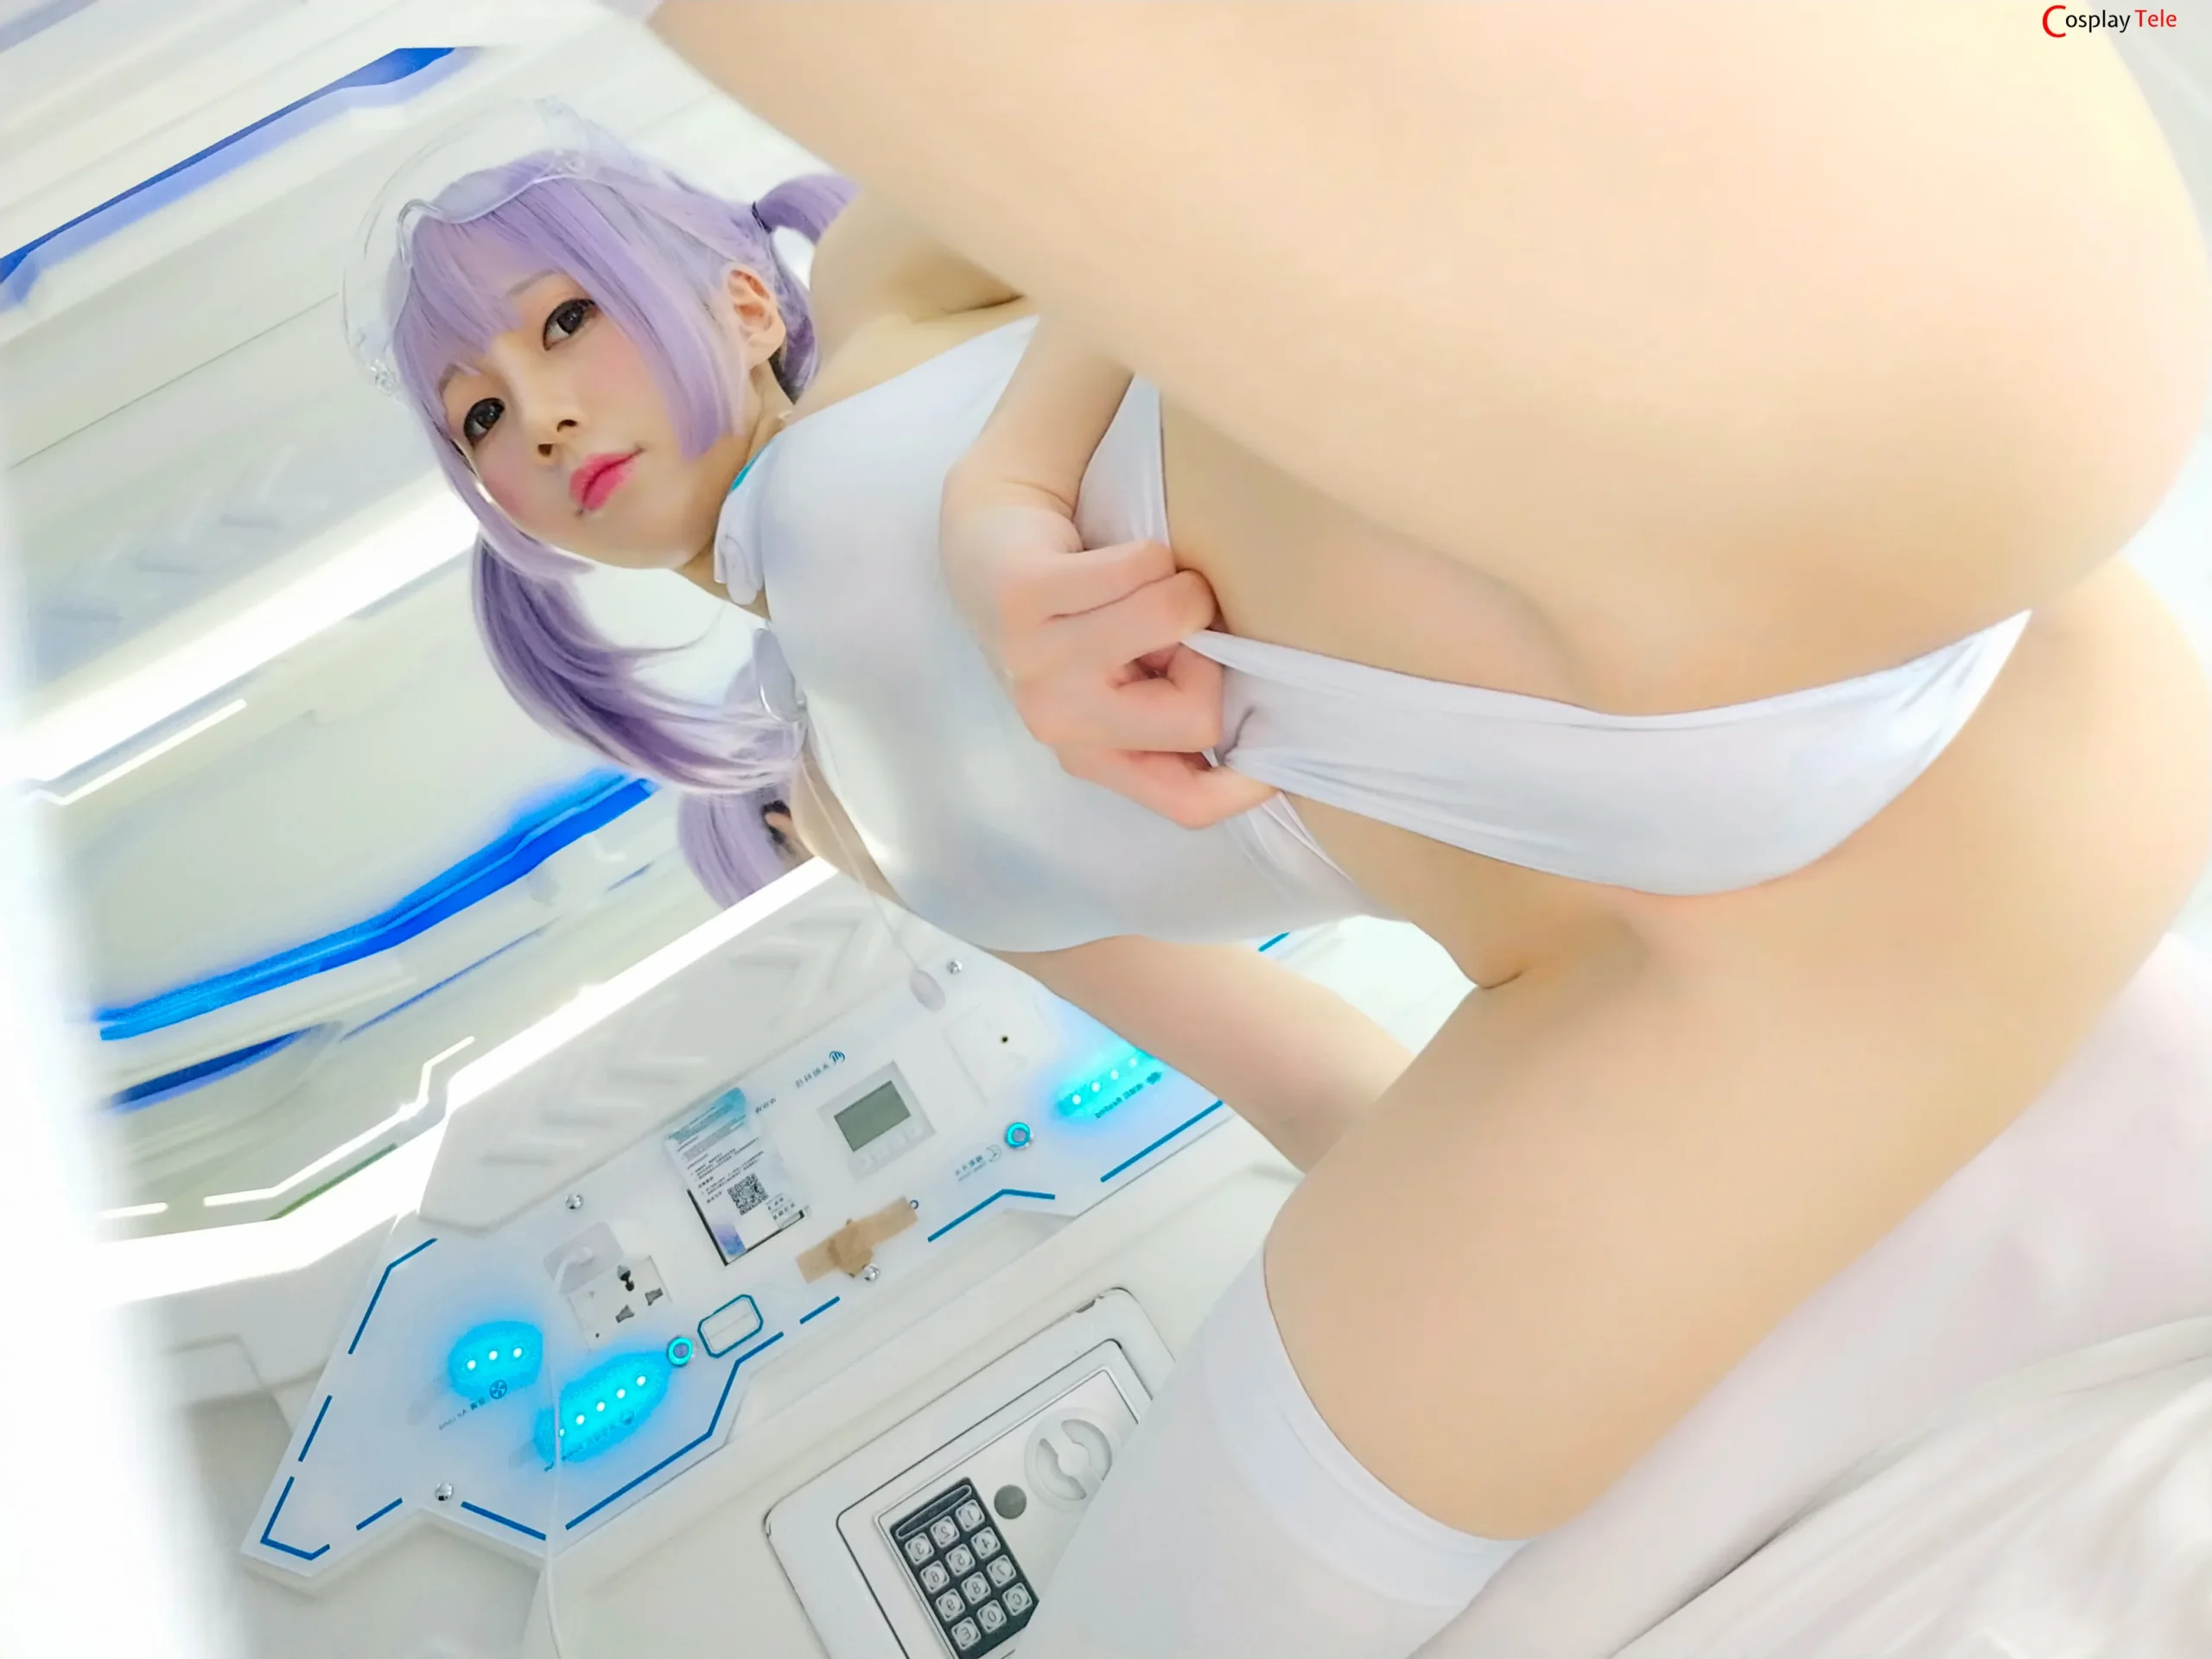 Nagisa (魔物喵) - Artificial Intelligence and Monster Meow Selfie "73 photos and 3 videos"